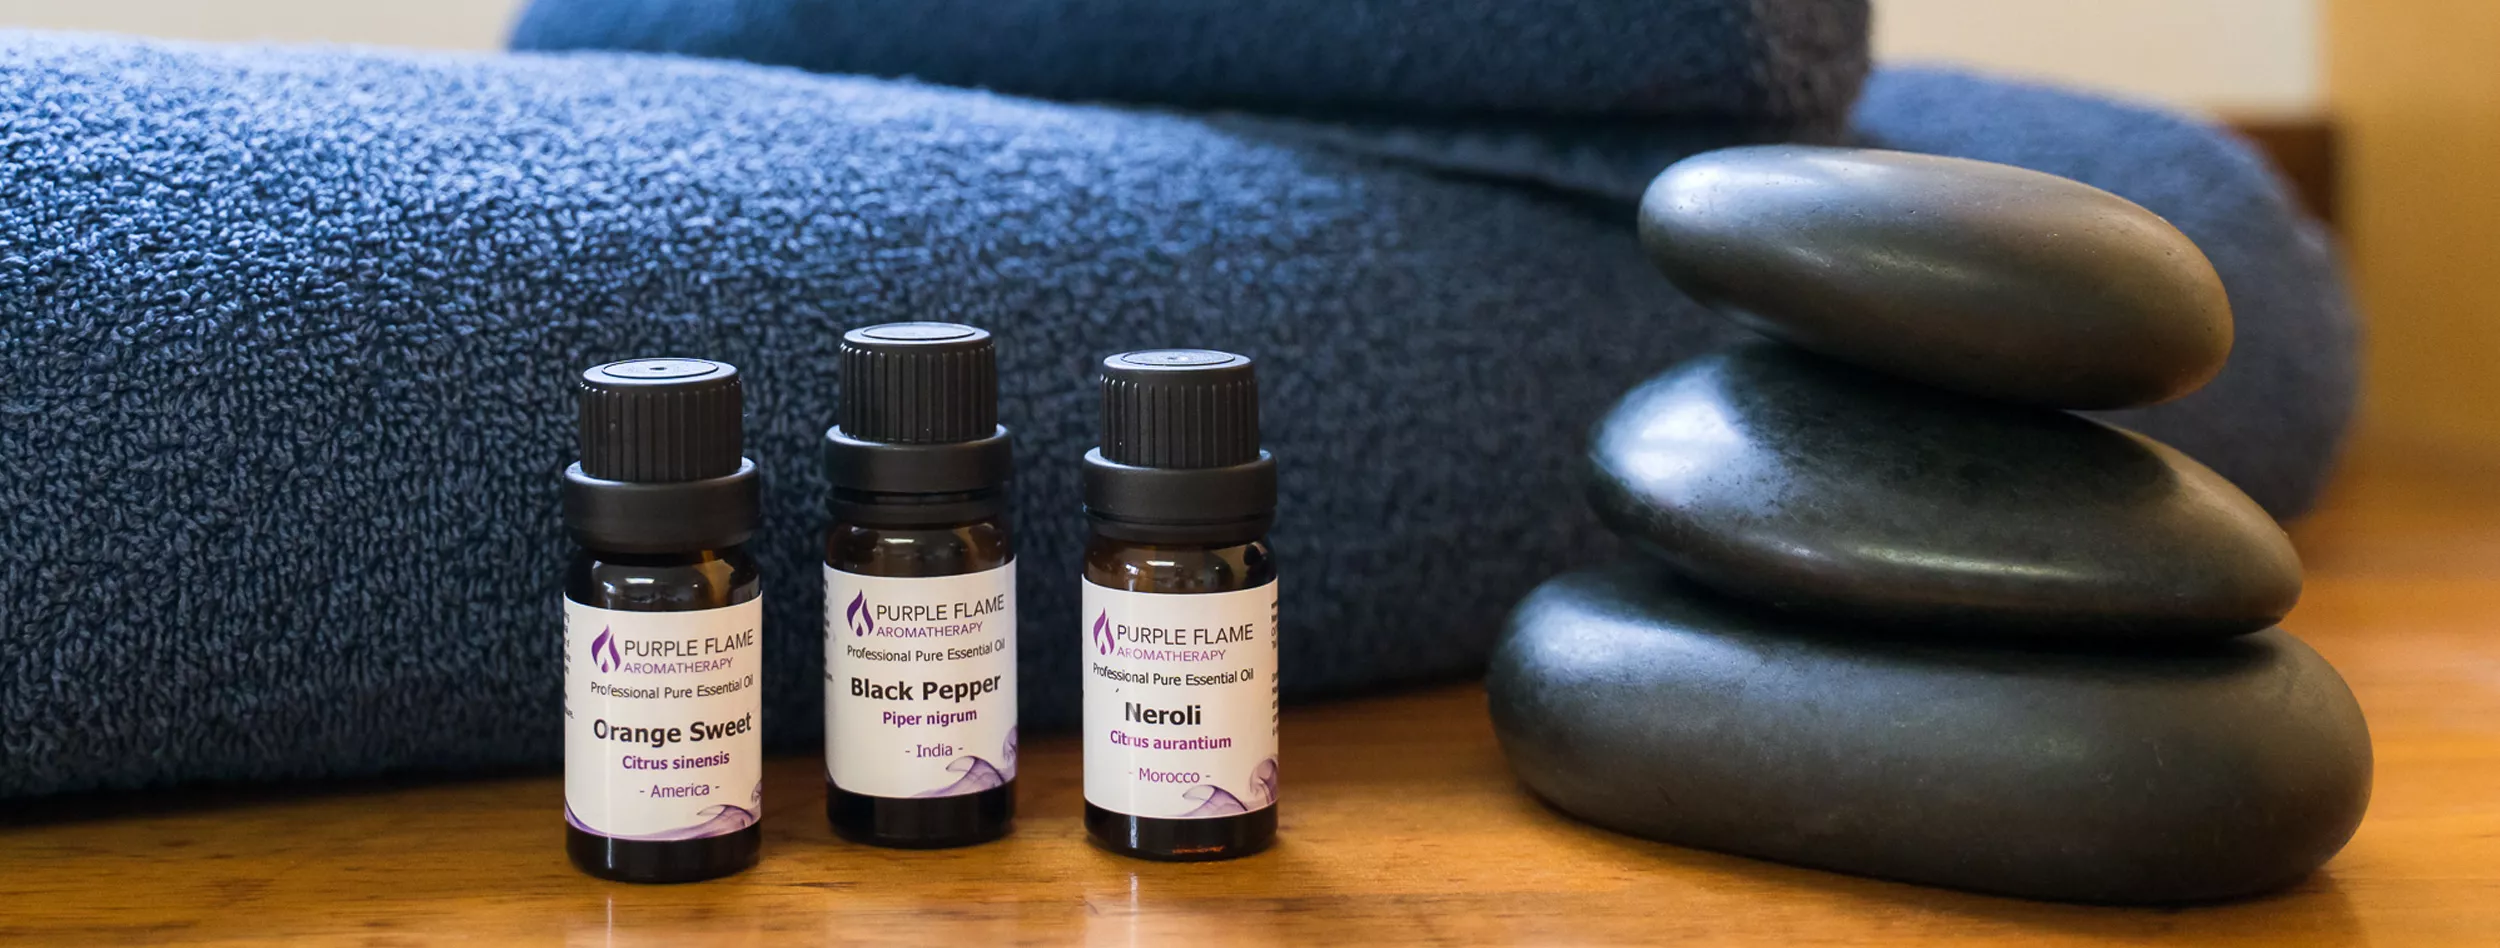 Natural treatments and therapies, Aromatherapy, Massage, The Heeler Centre, Hassocks